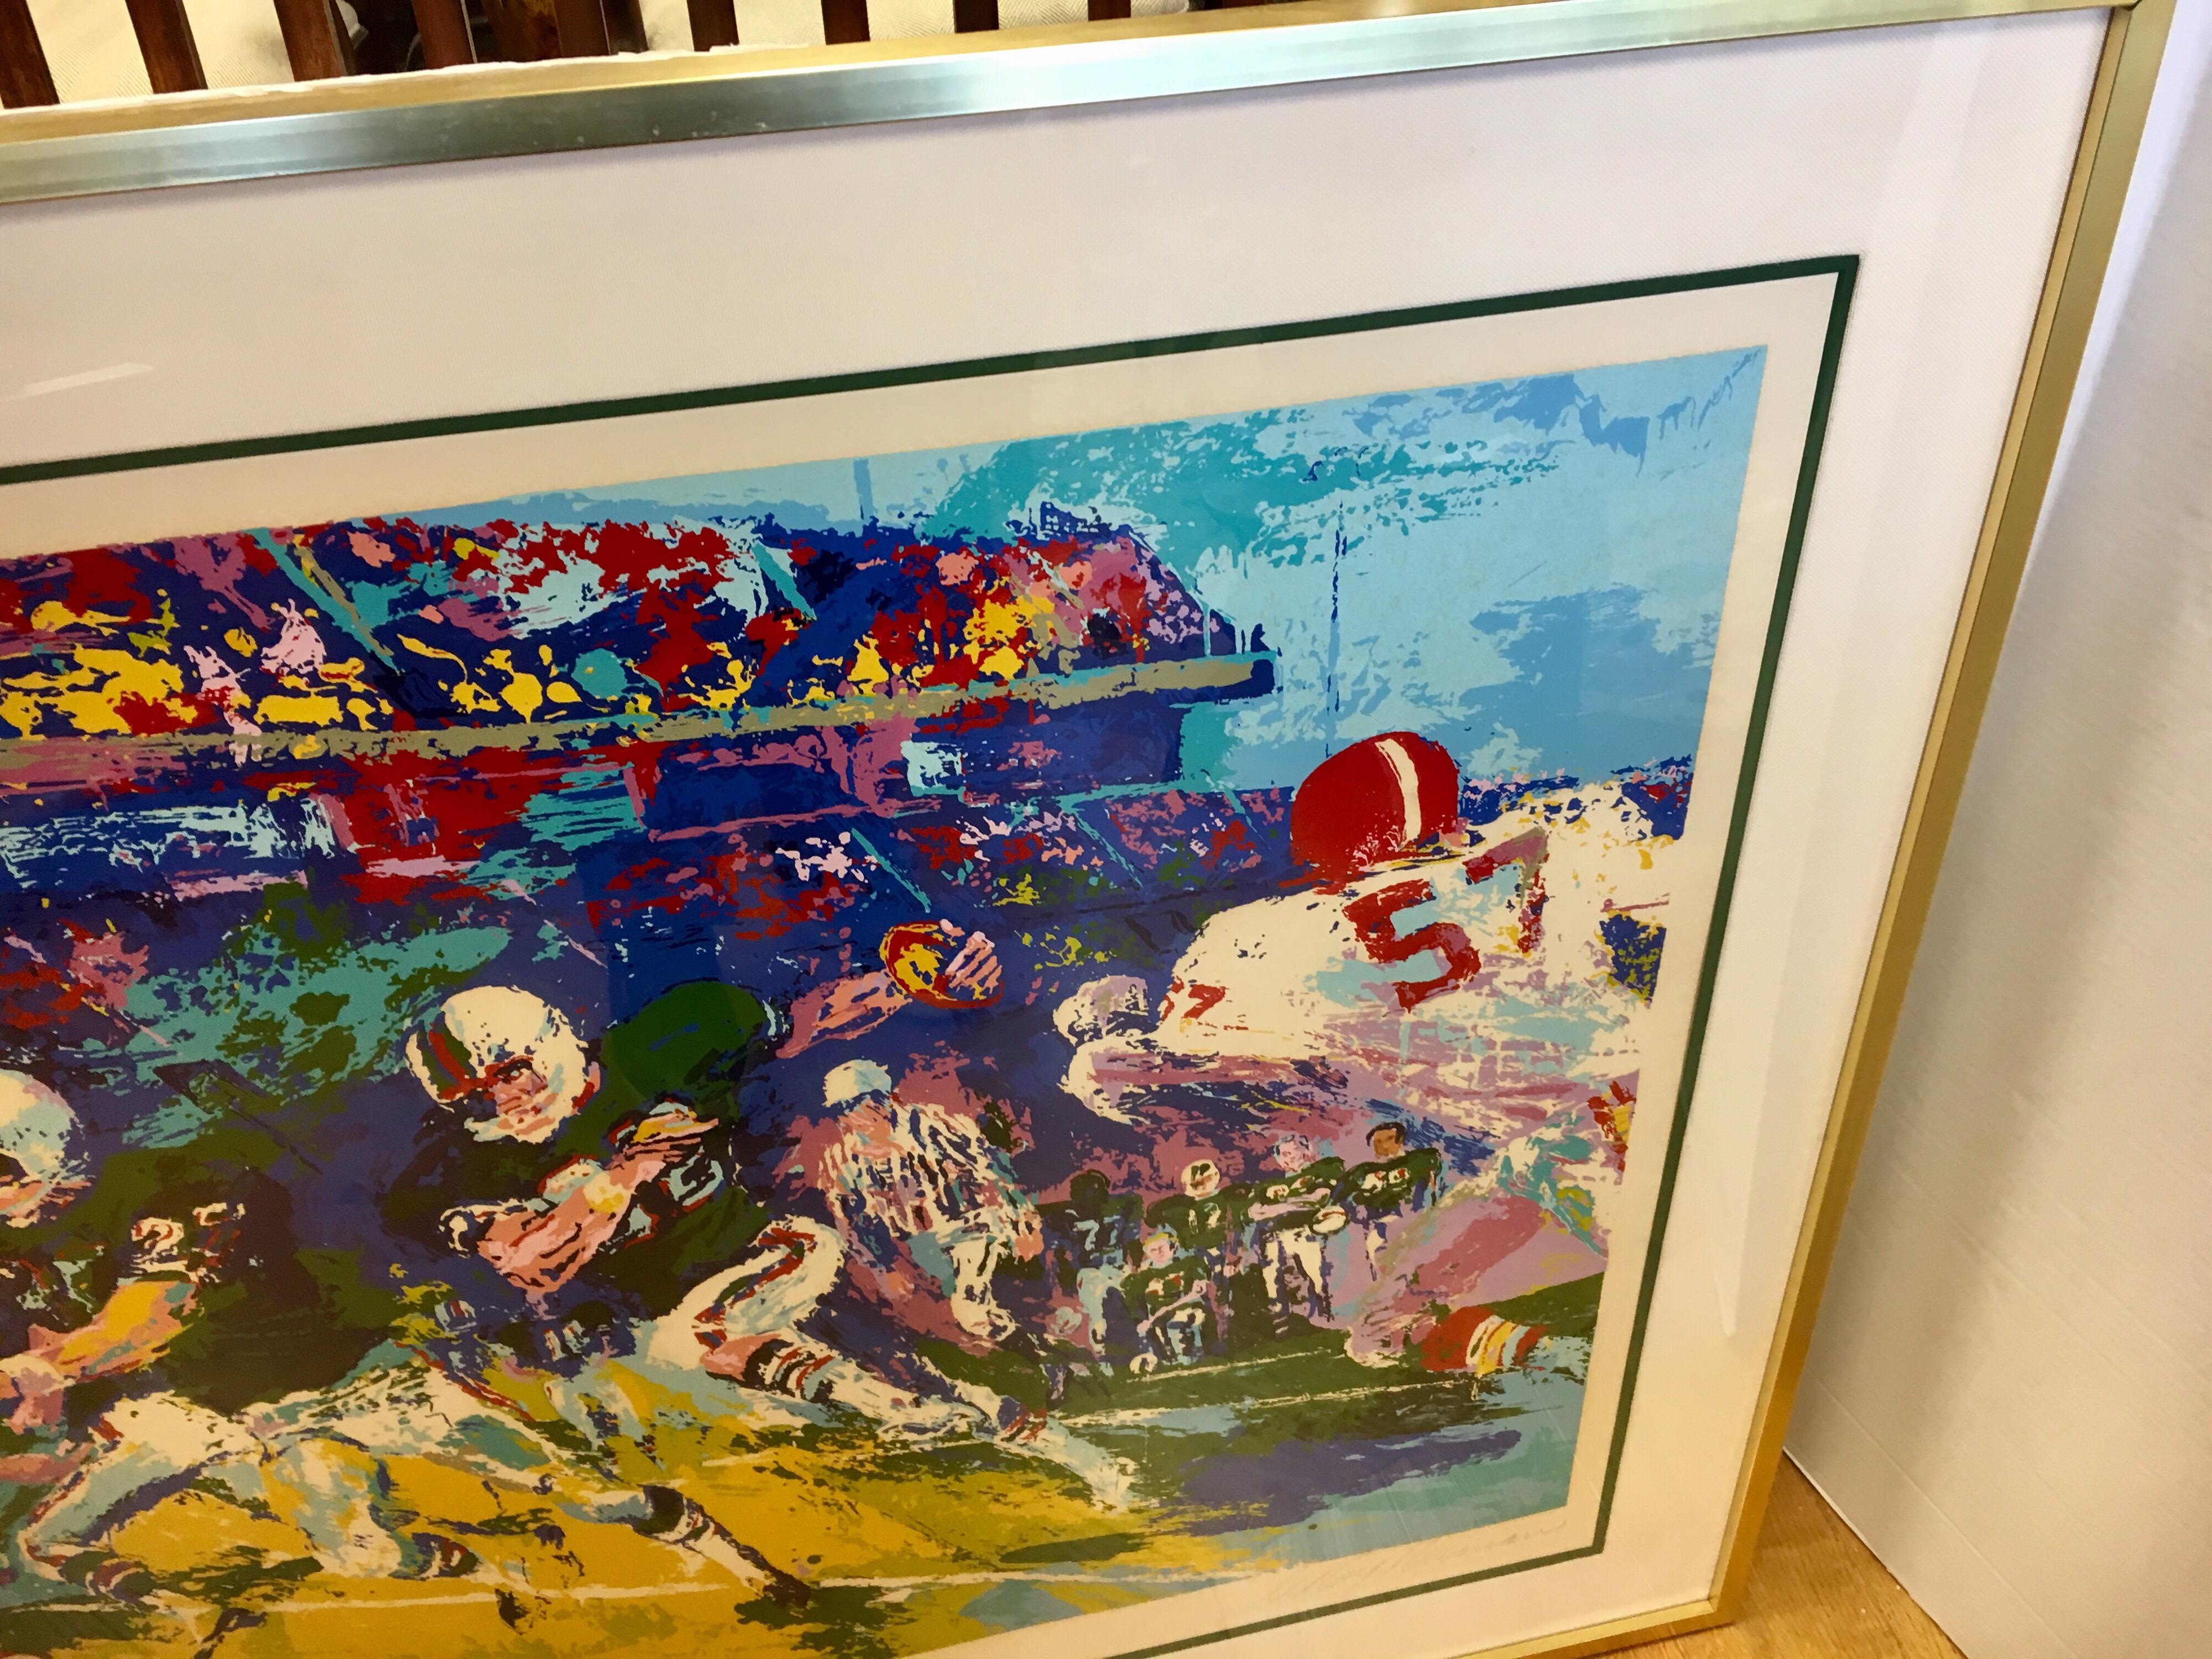 Metal LeRoy Neiman Signed & Numbered Large Serigraph Limited Edition Gridiron Football